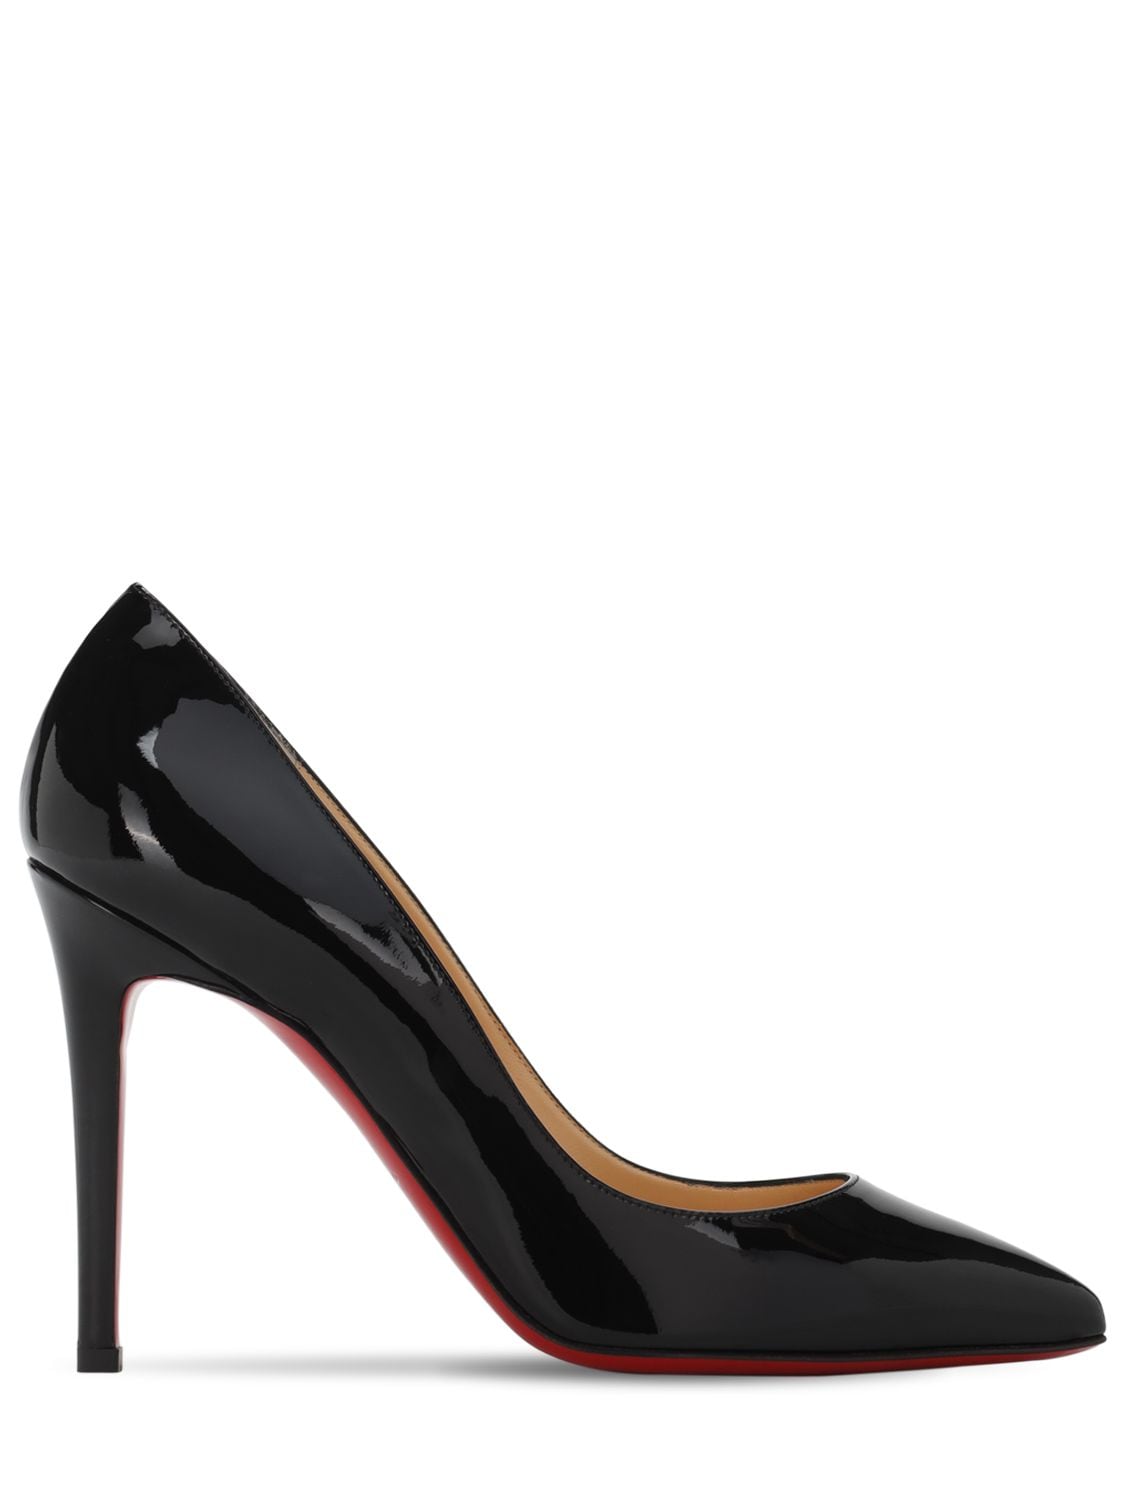 Christian Louboutin Pigalle Patent Leather Pumps In Black | ModeSens